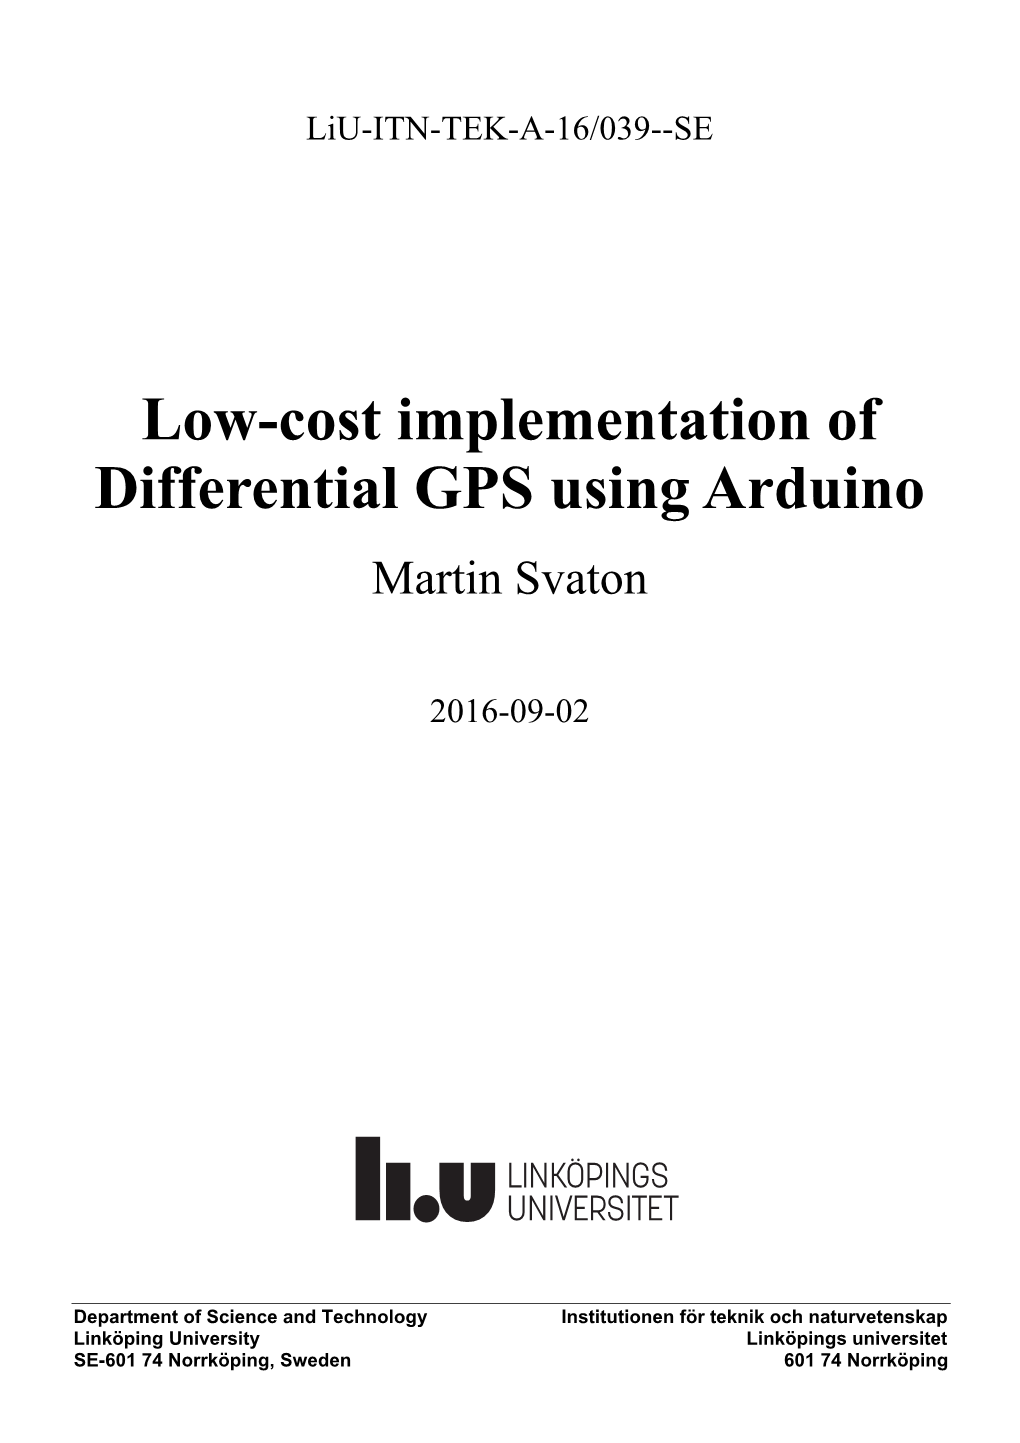 Low-Cost Implementation of Differential GPS Using Arduino Martin Svaton